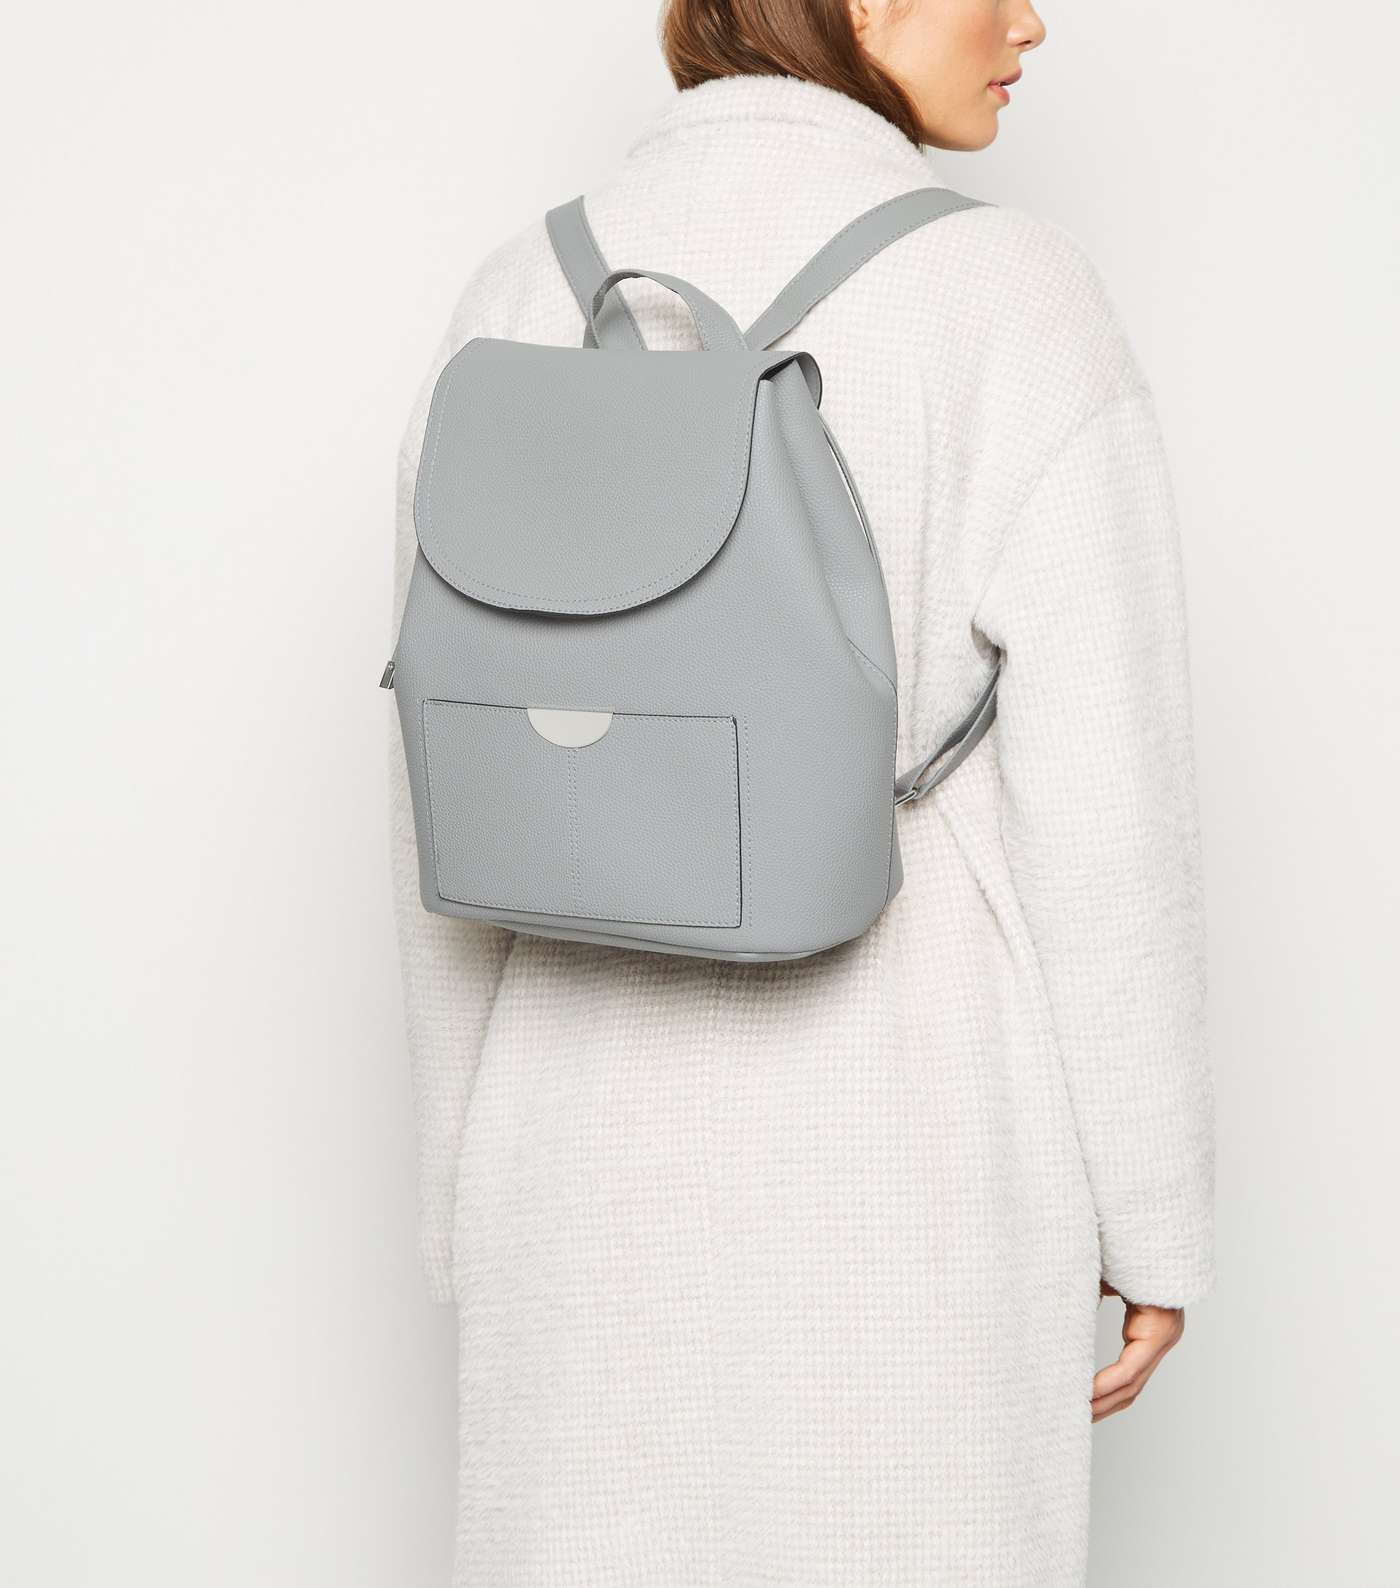 Grey Leather-Look Drawstring Backpack Image 2